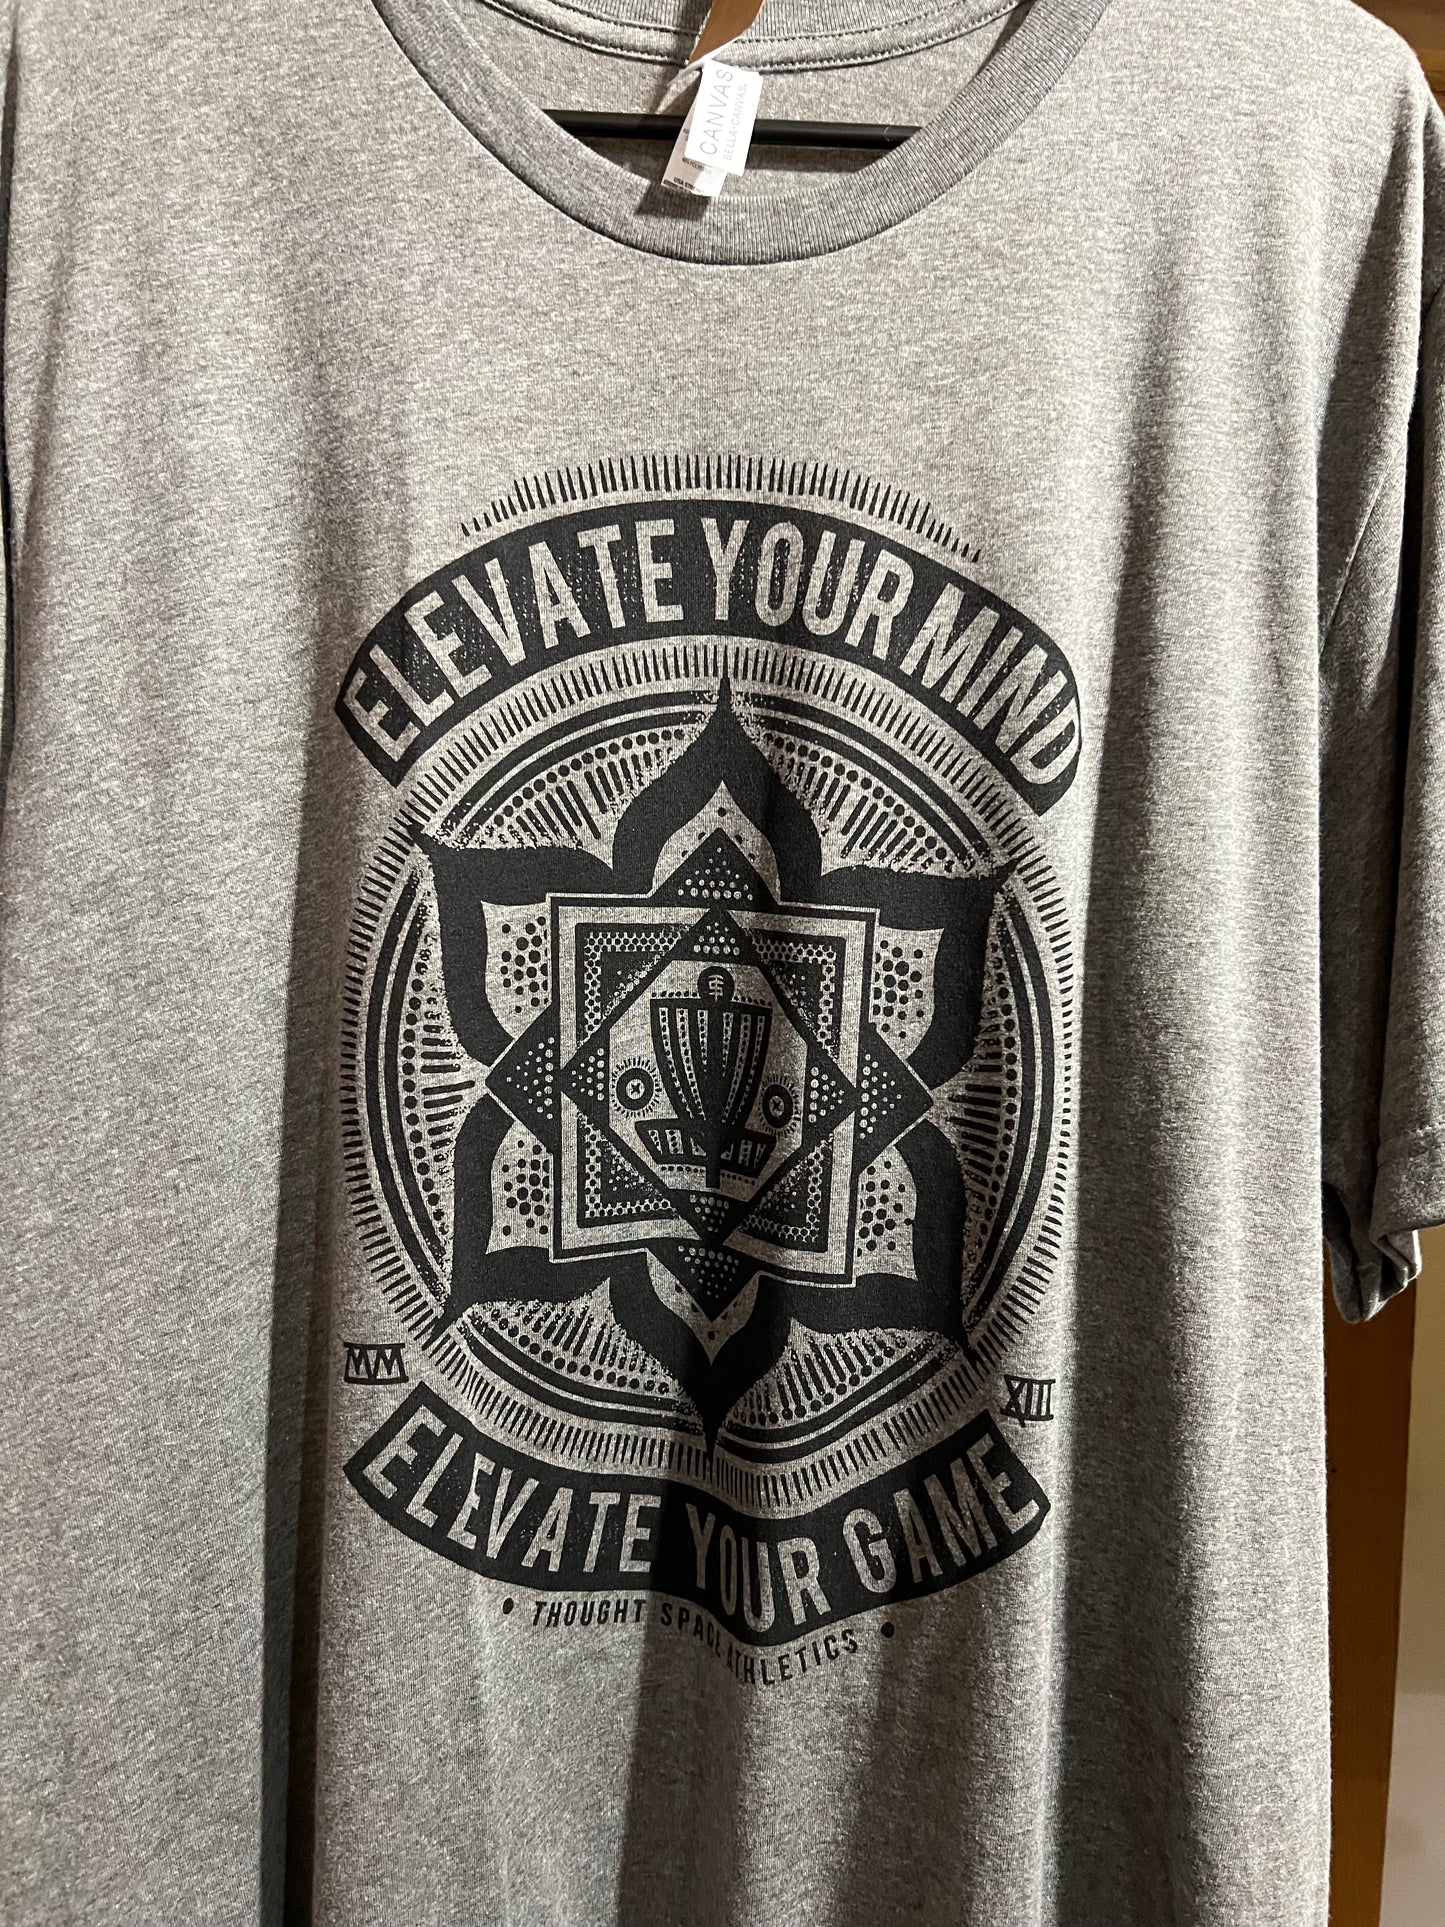 Thought Space Elevate Your Mind Tee